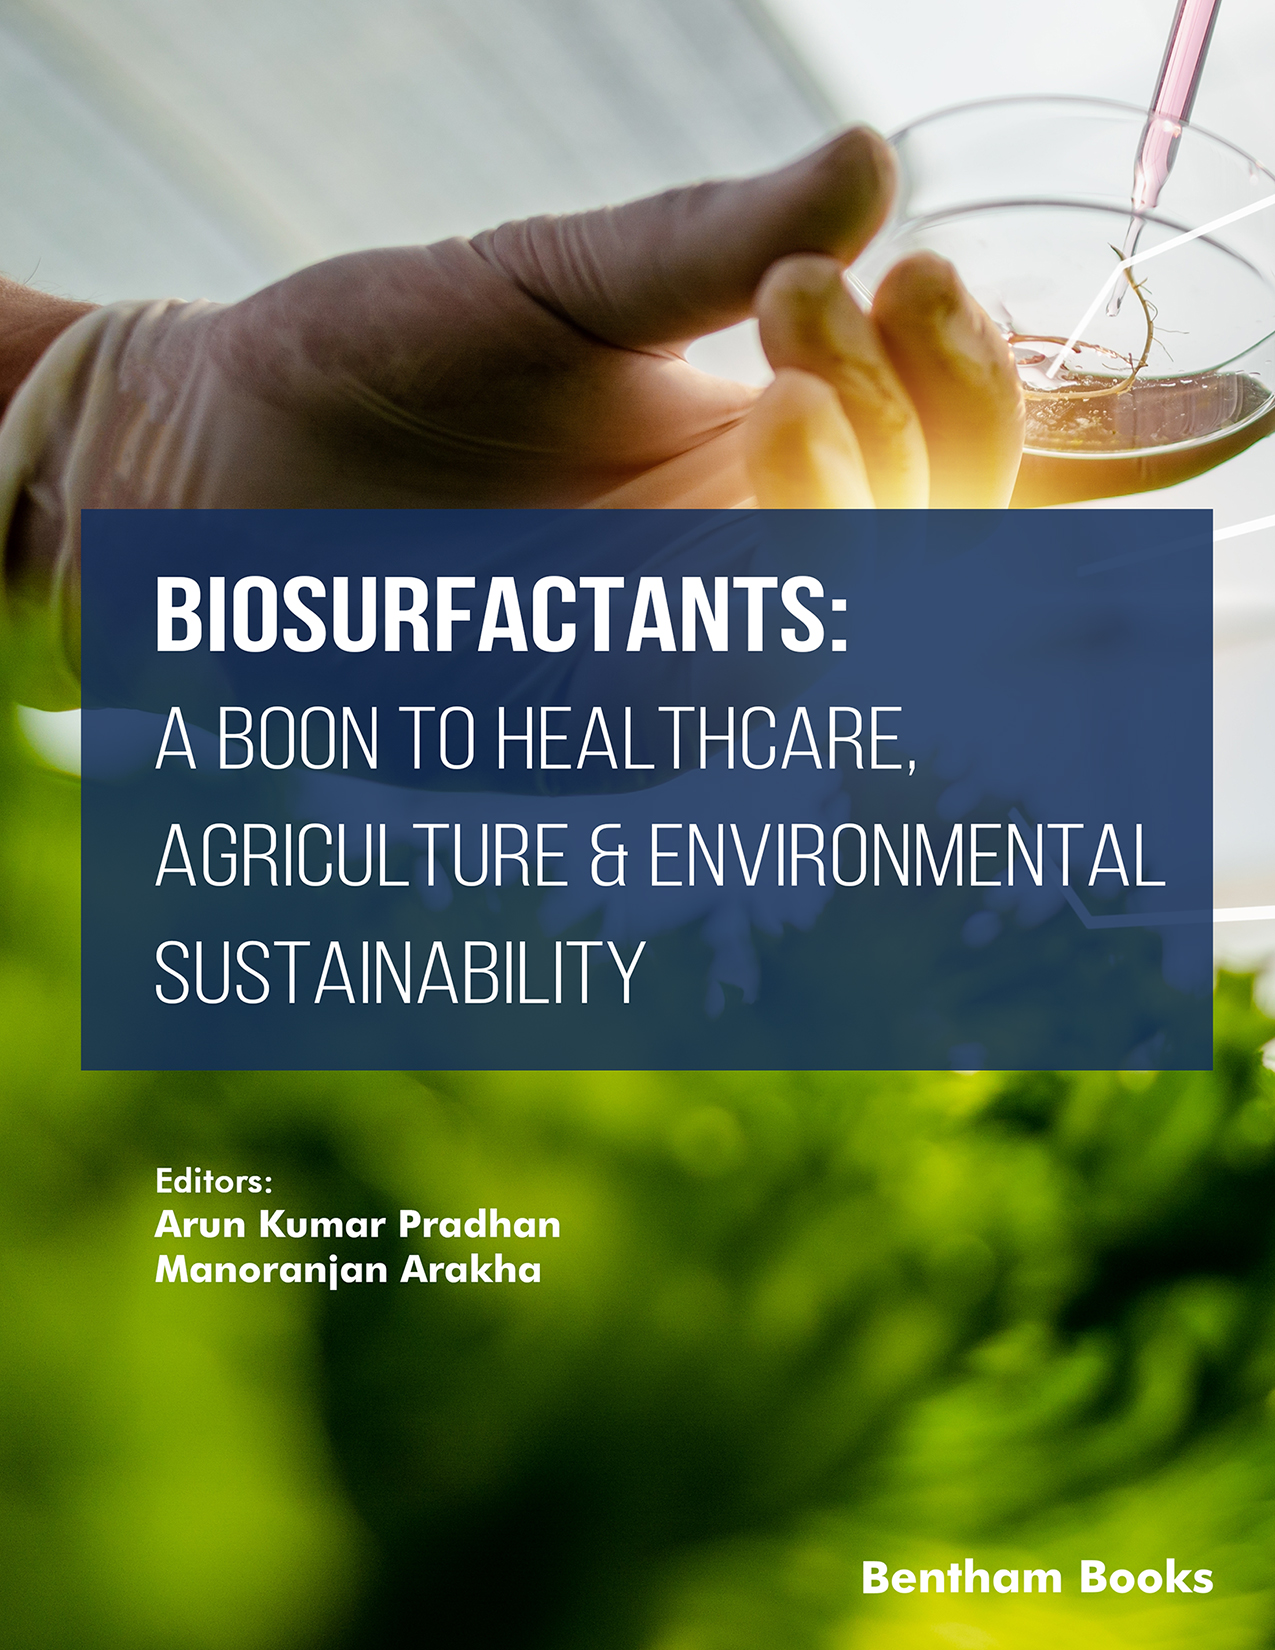 Biosurfactants: A Boon to Healthcare, Agriculture & Environmental Sustainability